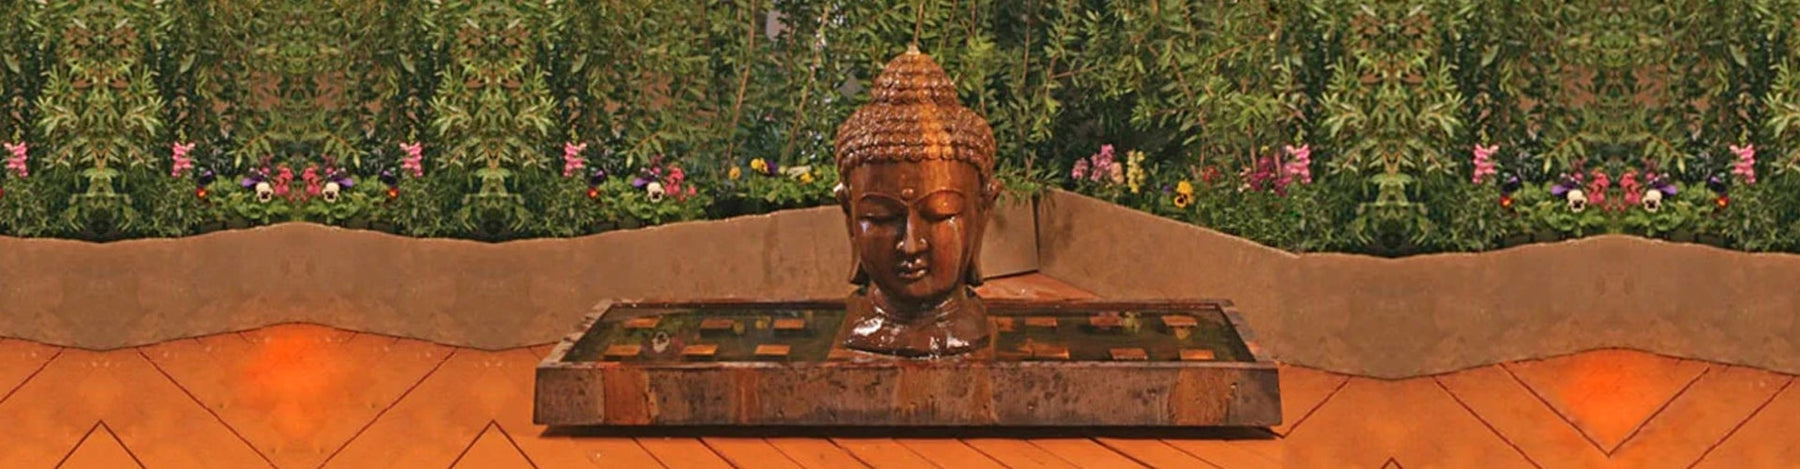 Buddha Head Fountain large in action in backyard featured image